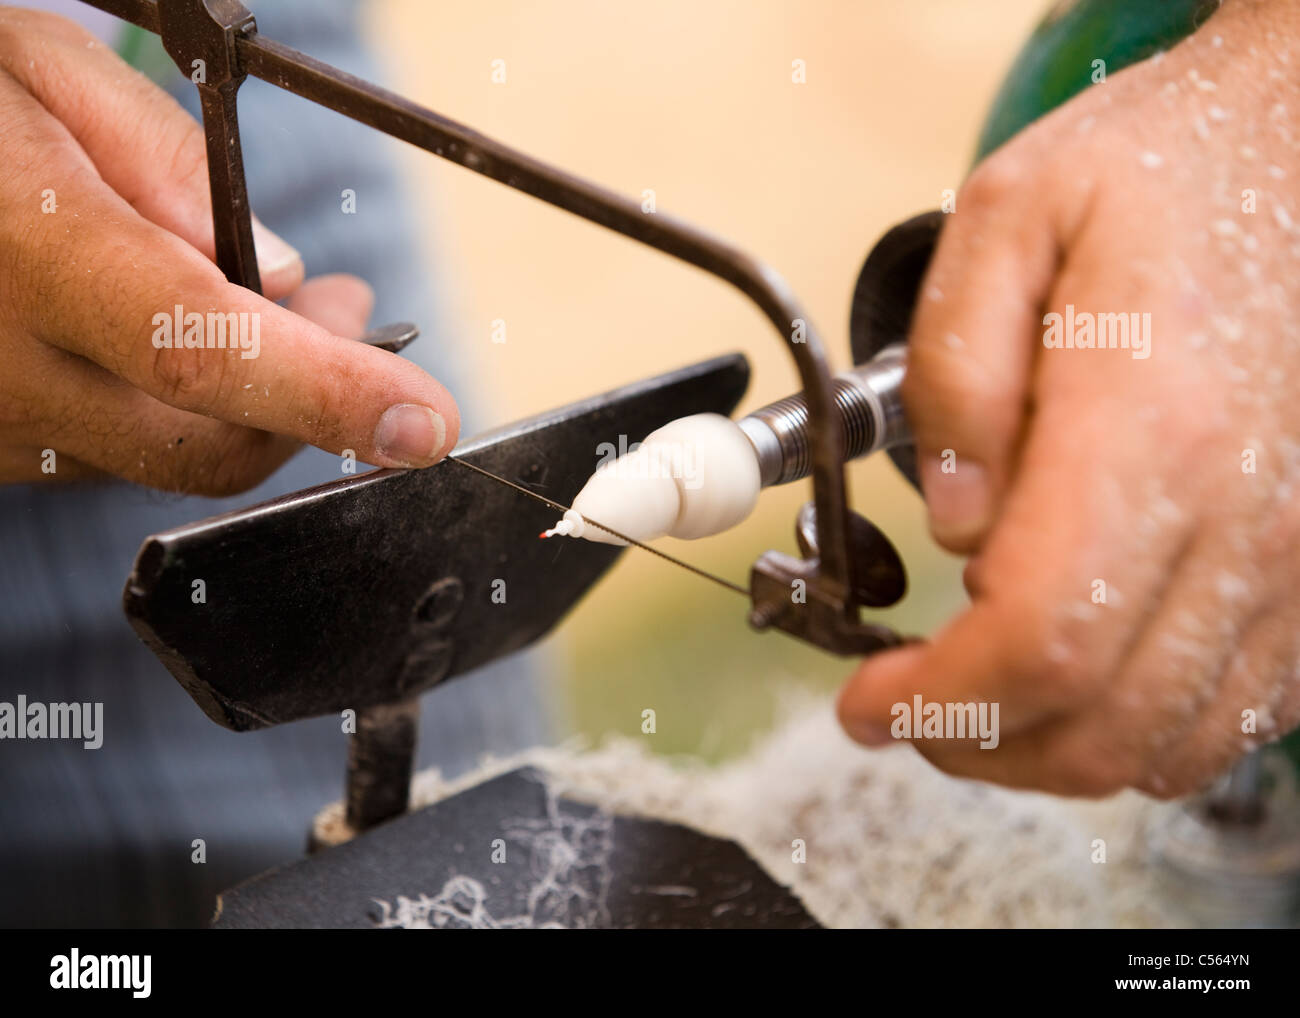 A wood carver uses a coping saw to cut a small piece of wood while turning on a lathe Stock Photo